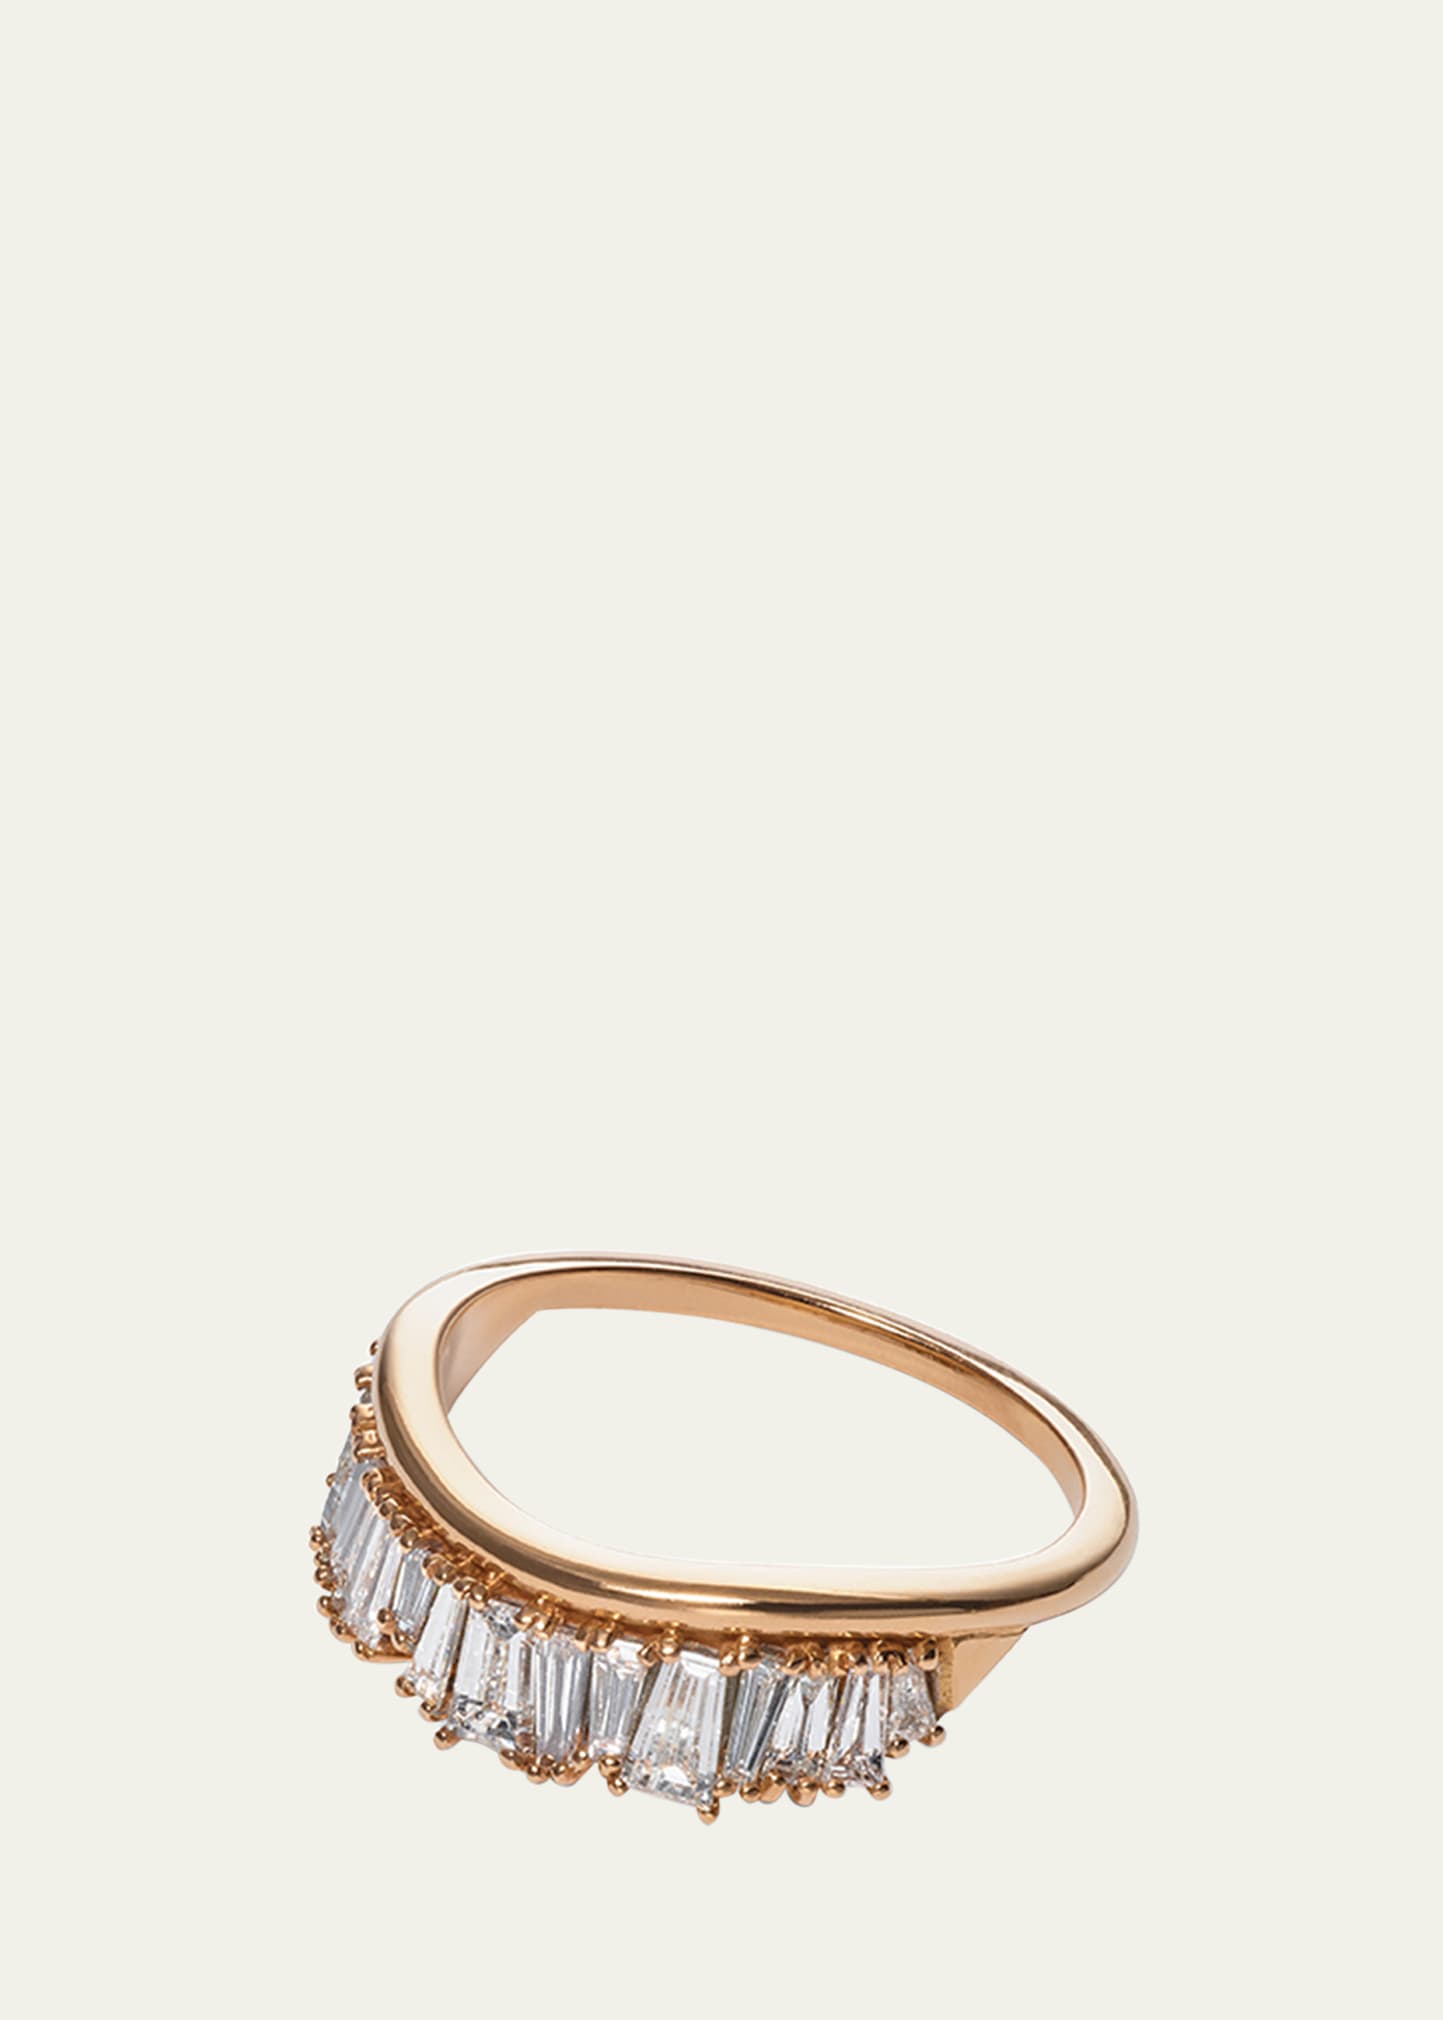 Nak Armstrong 20k Rose Gold Ruched Diamond Ring With White Diamonds In Rg